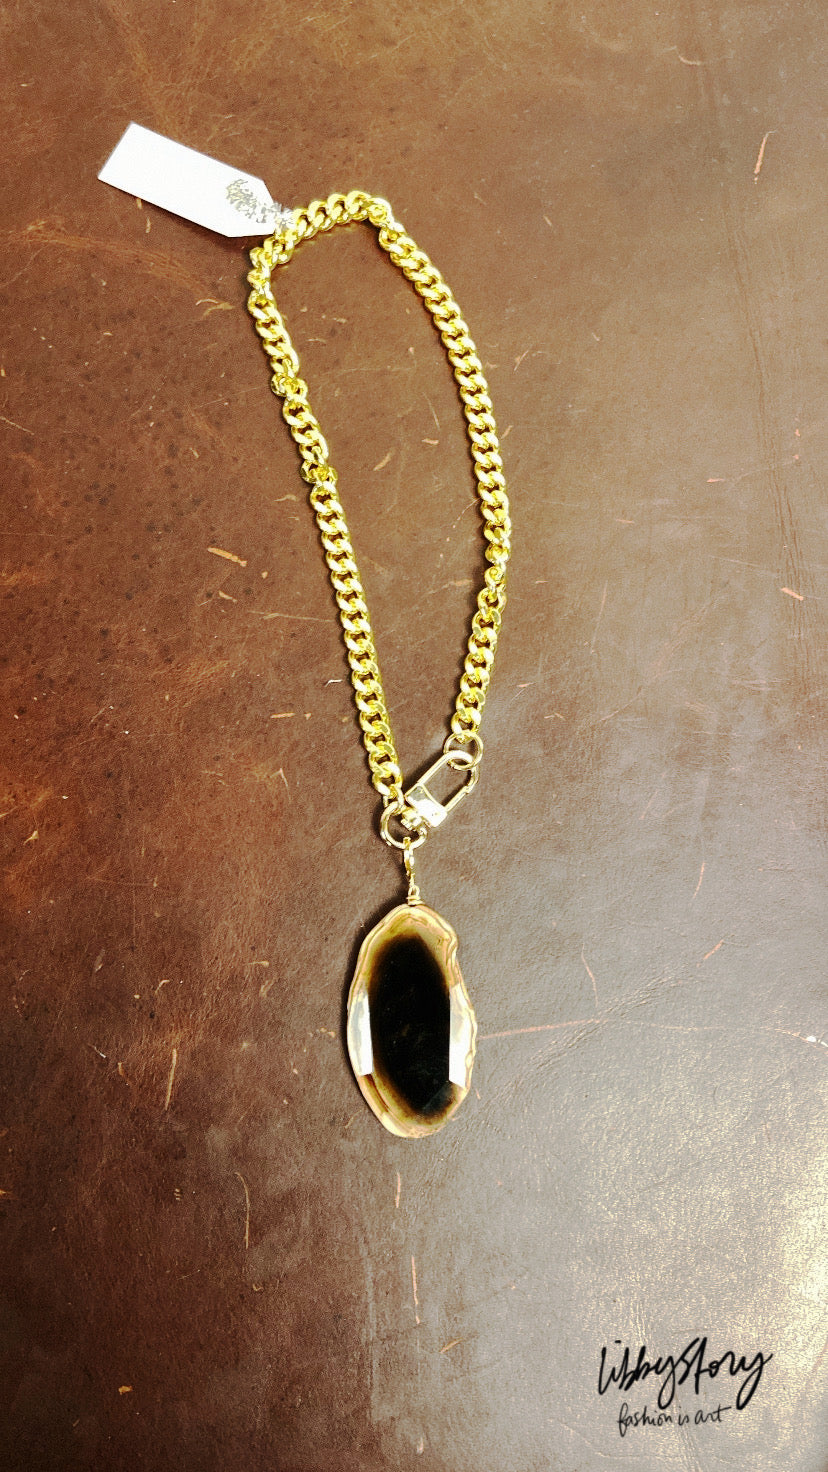 LS handmade Removable Agate Stone 18kt Gold Filled Chain Necklace